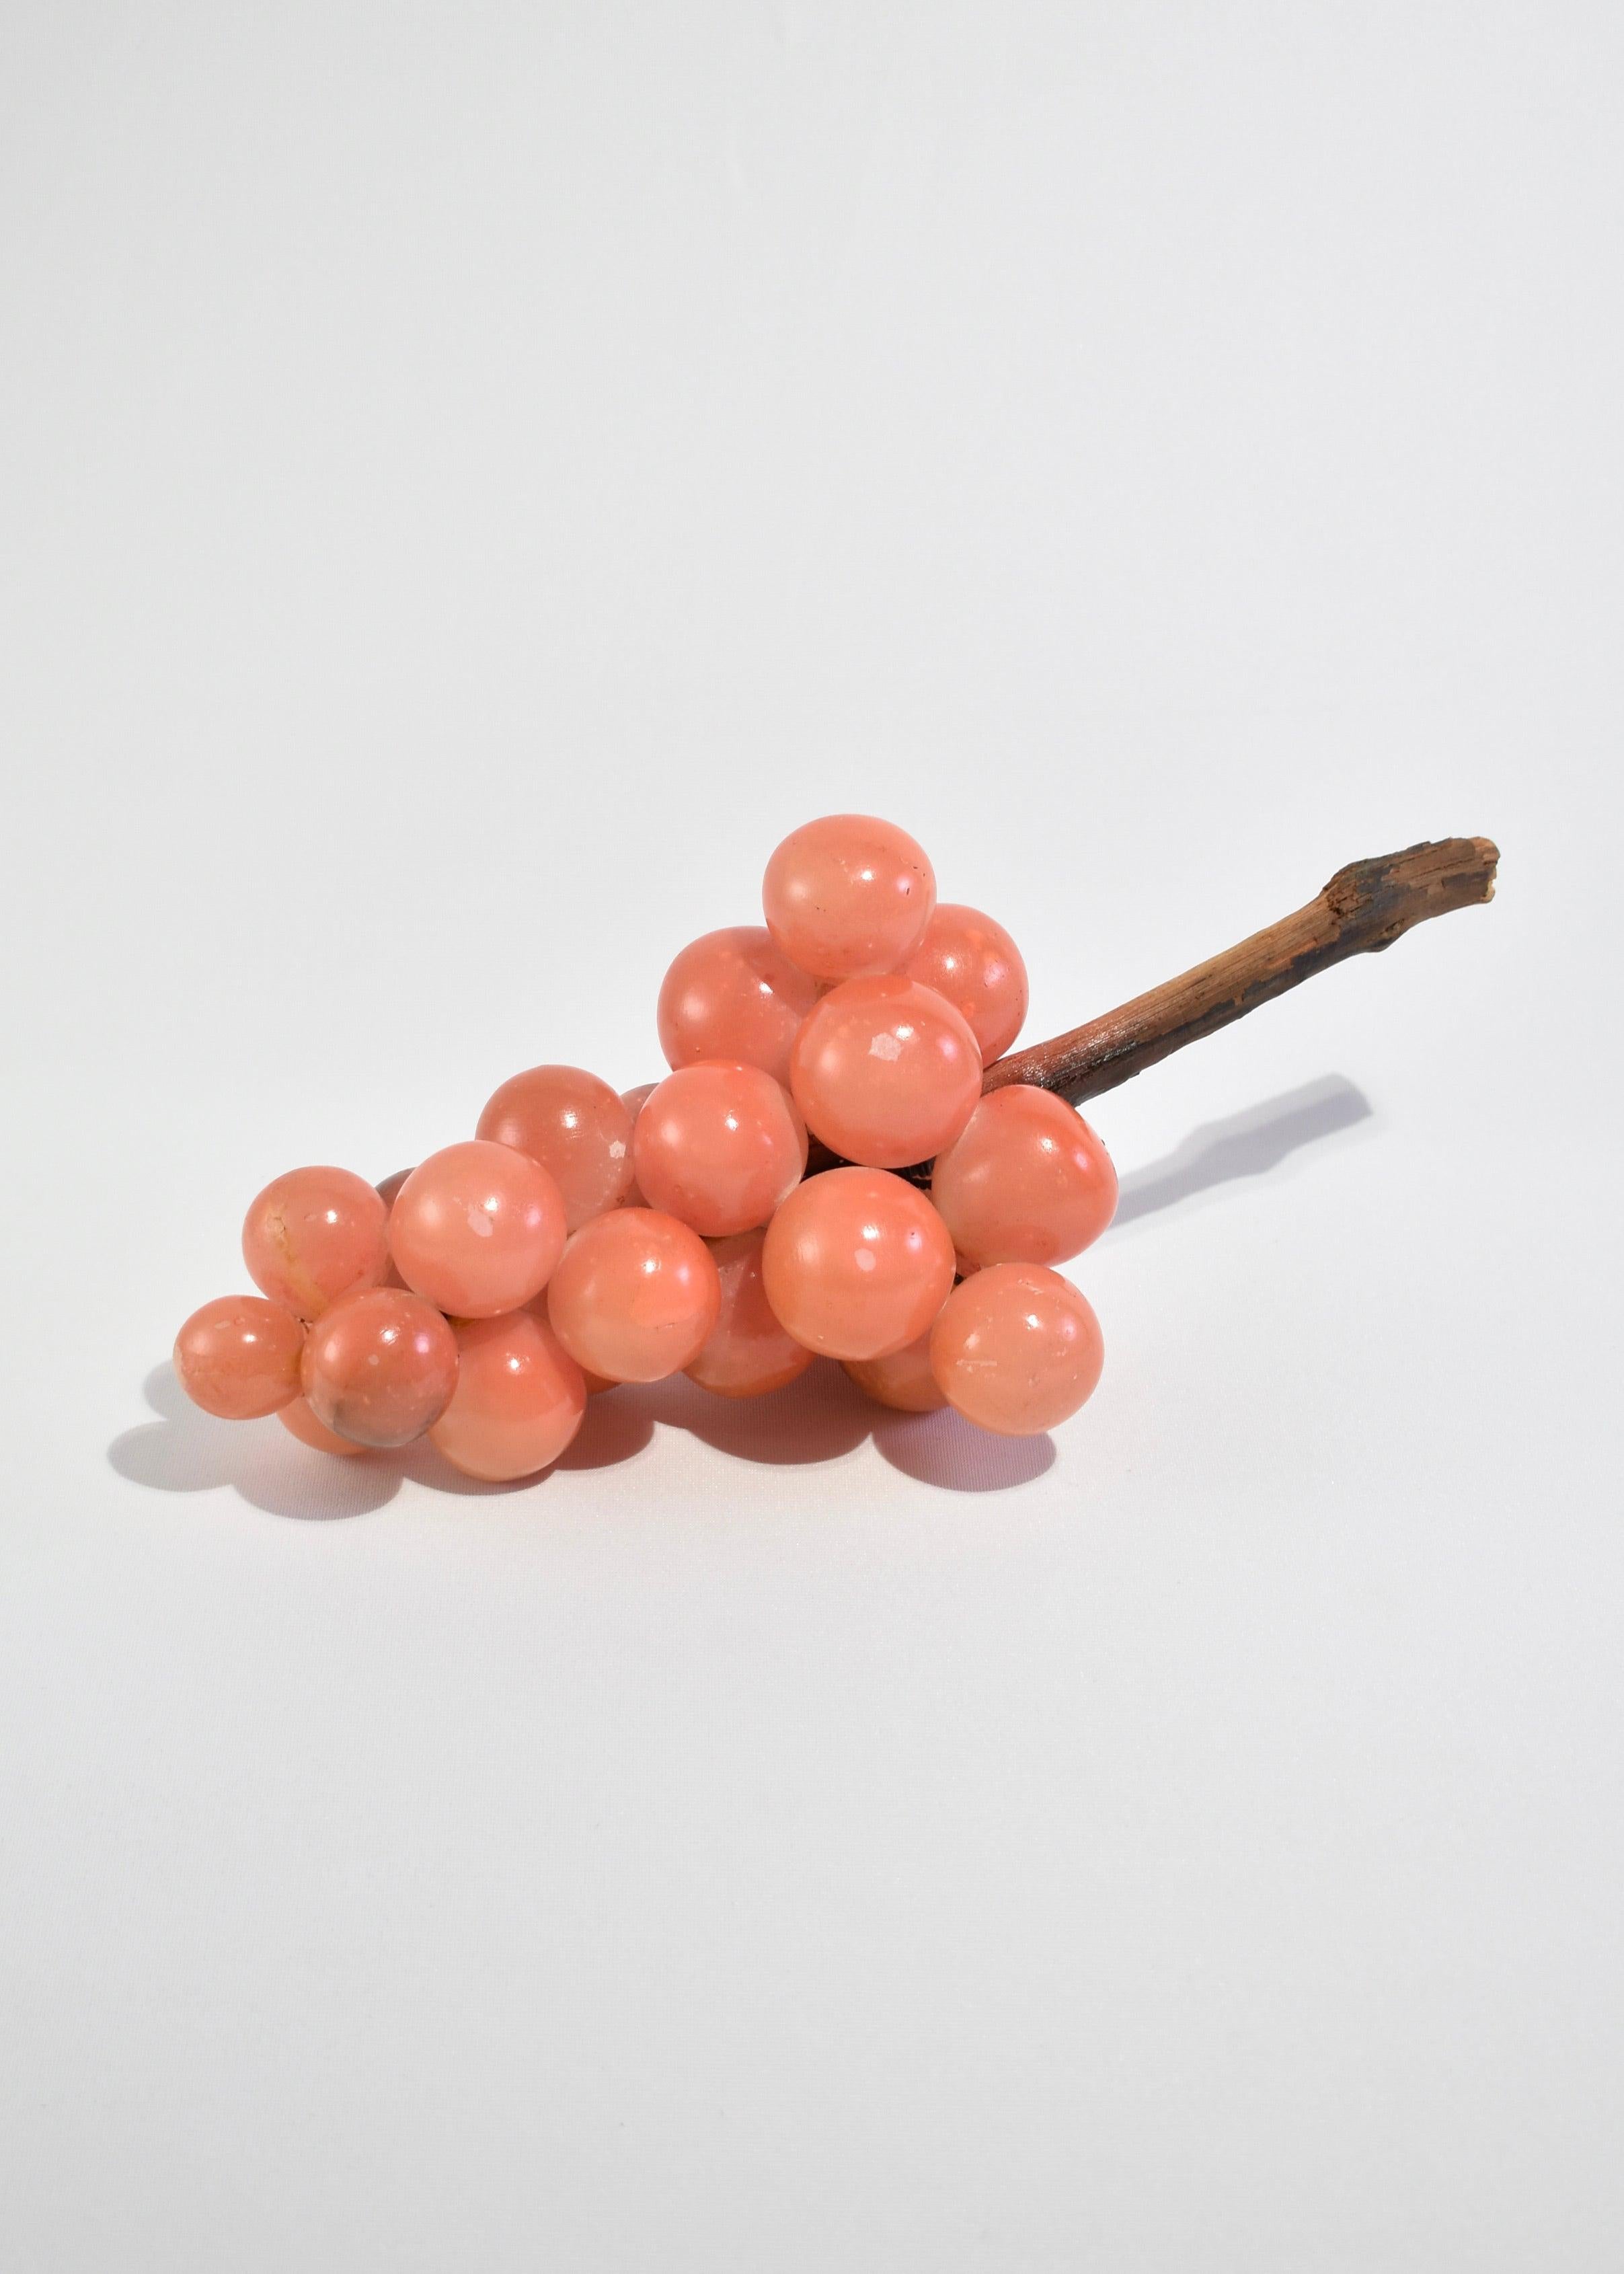 Rare, coral alabaster grape sculpture with wooden stem; a beautiful coffee table accent piece.